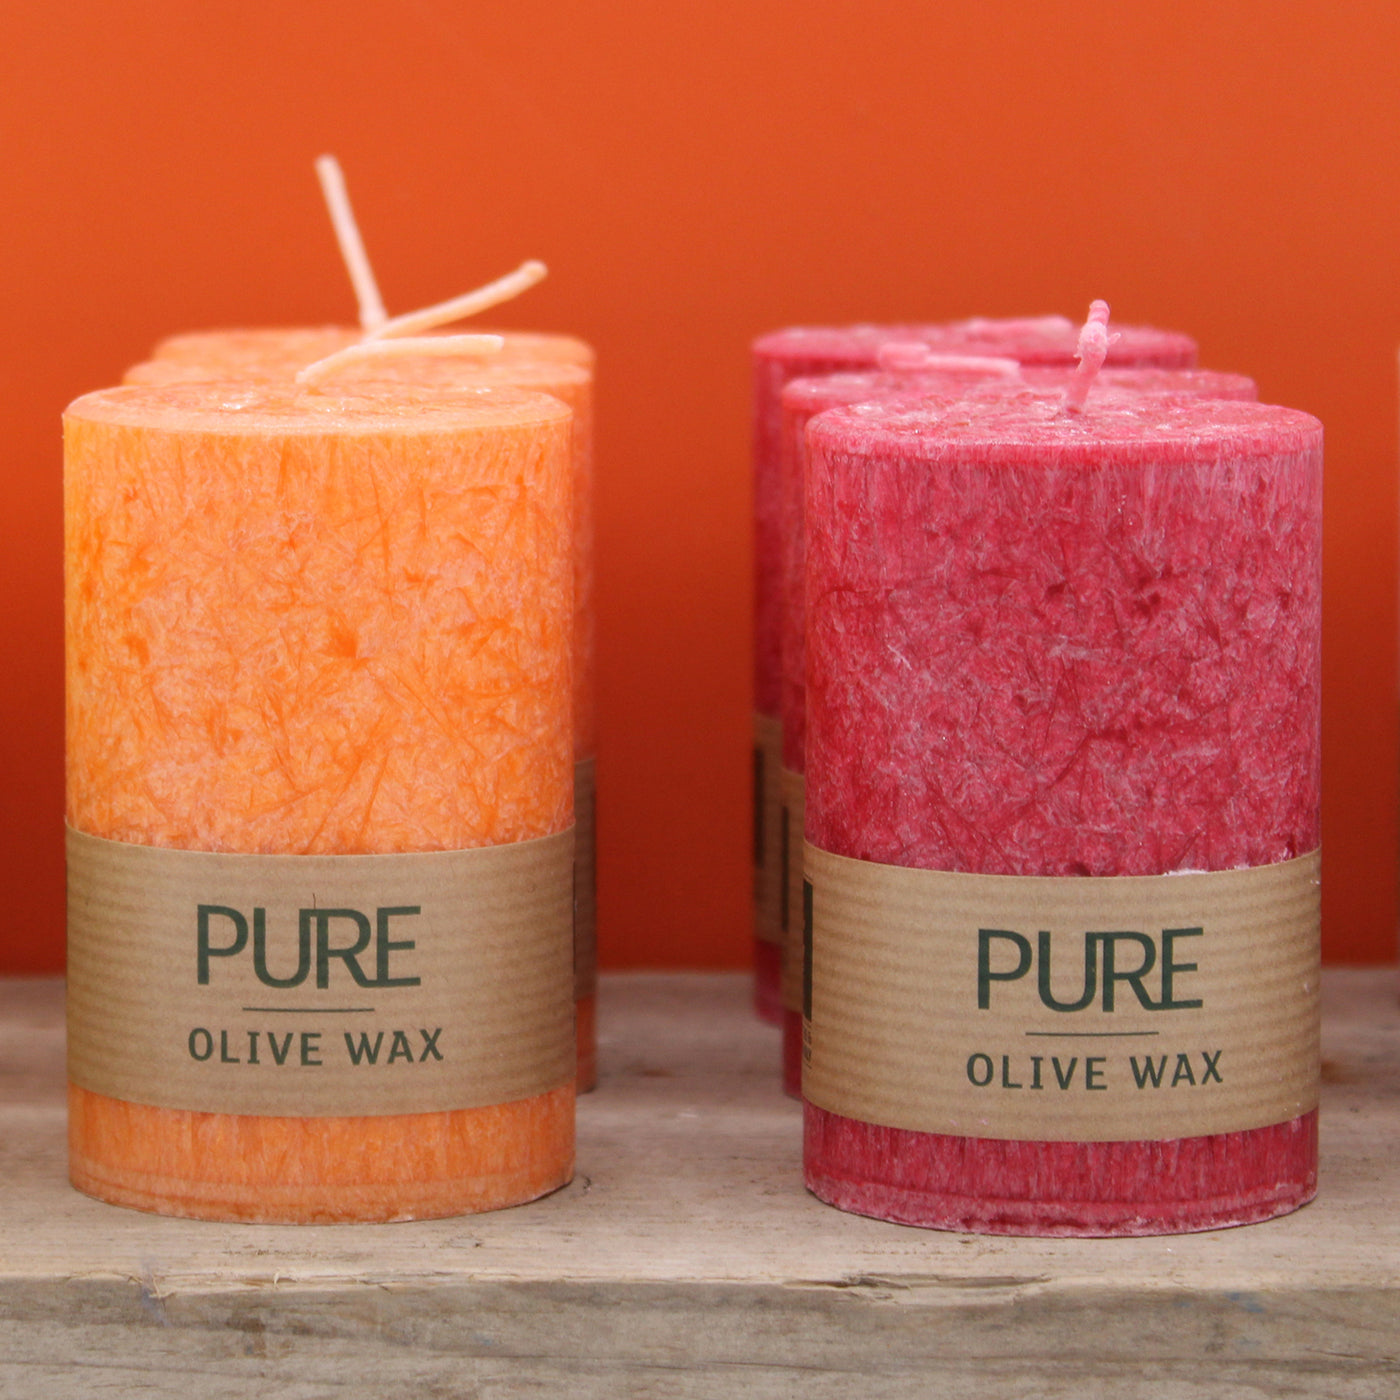 Pure Olive Unfragranced Handmade Antique Red Wax Pillar Candle.